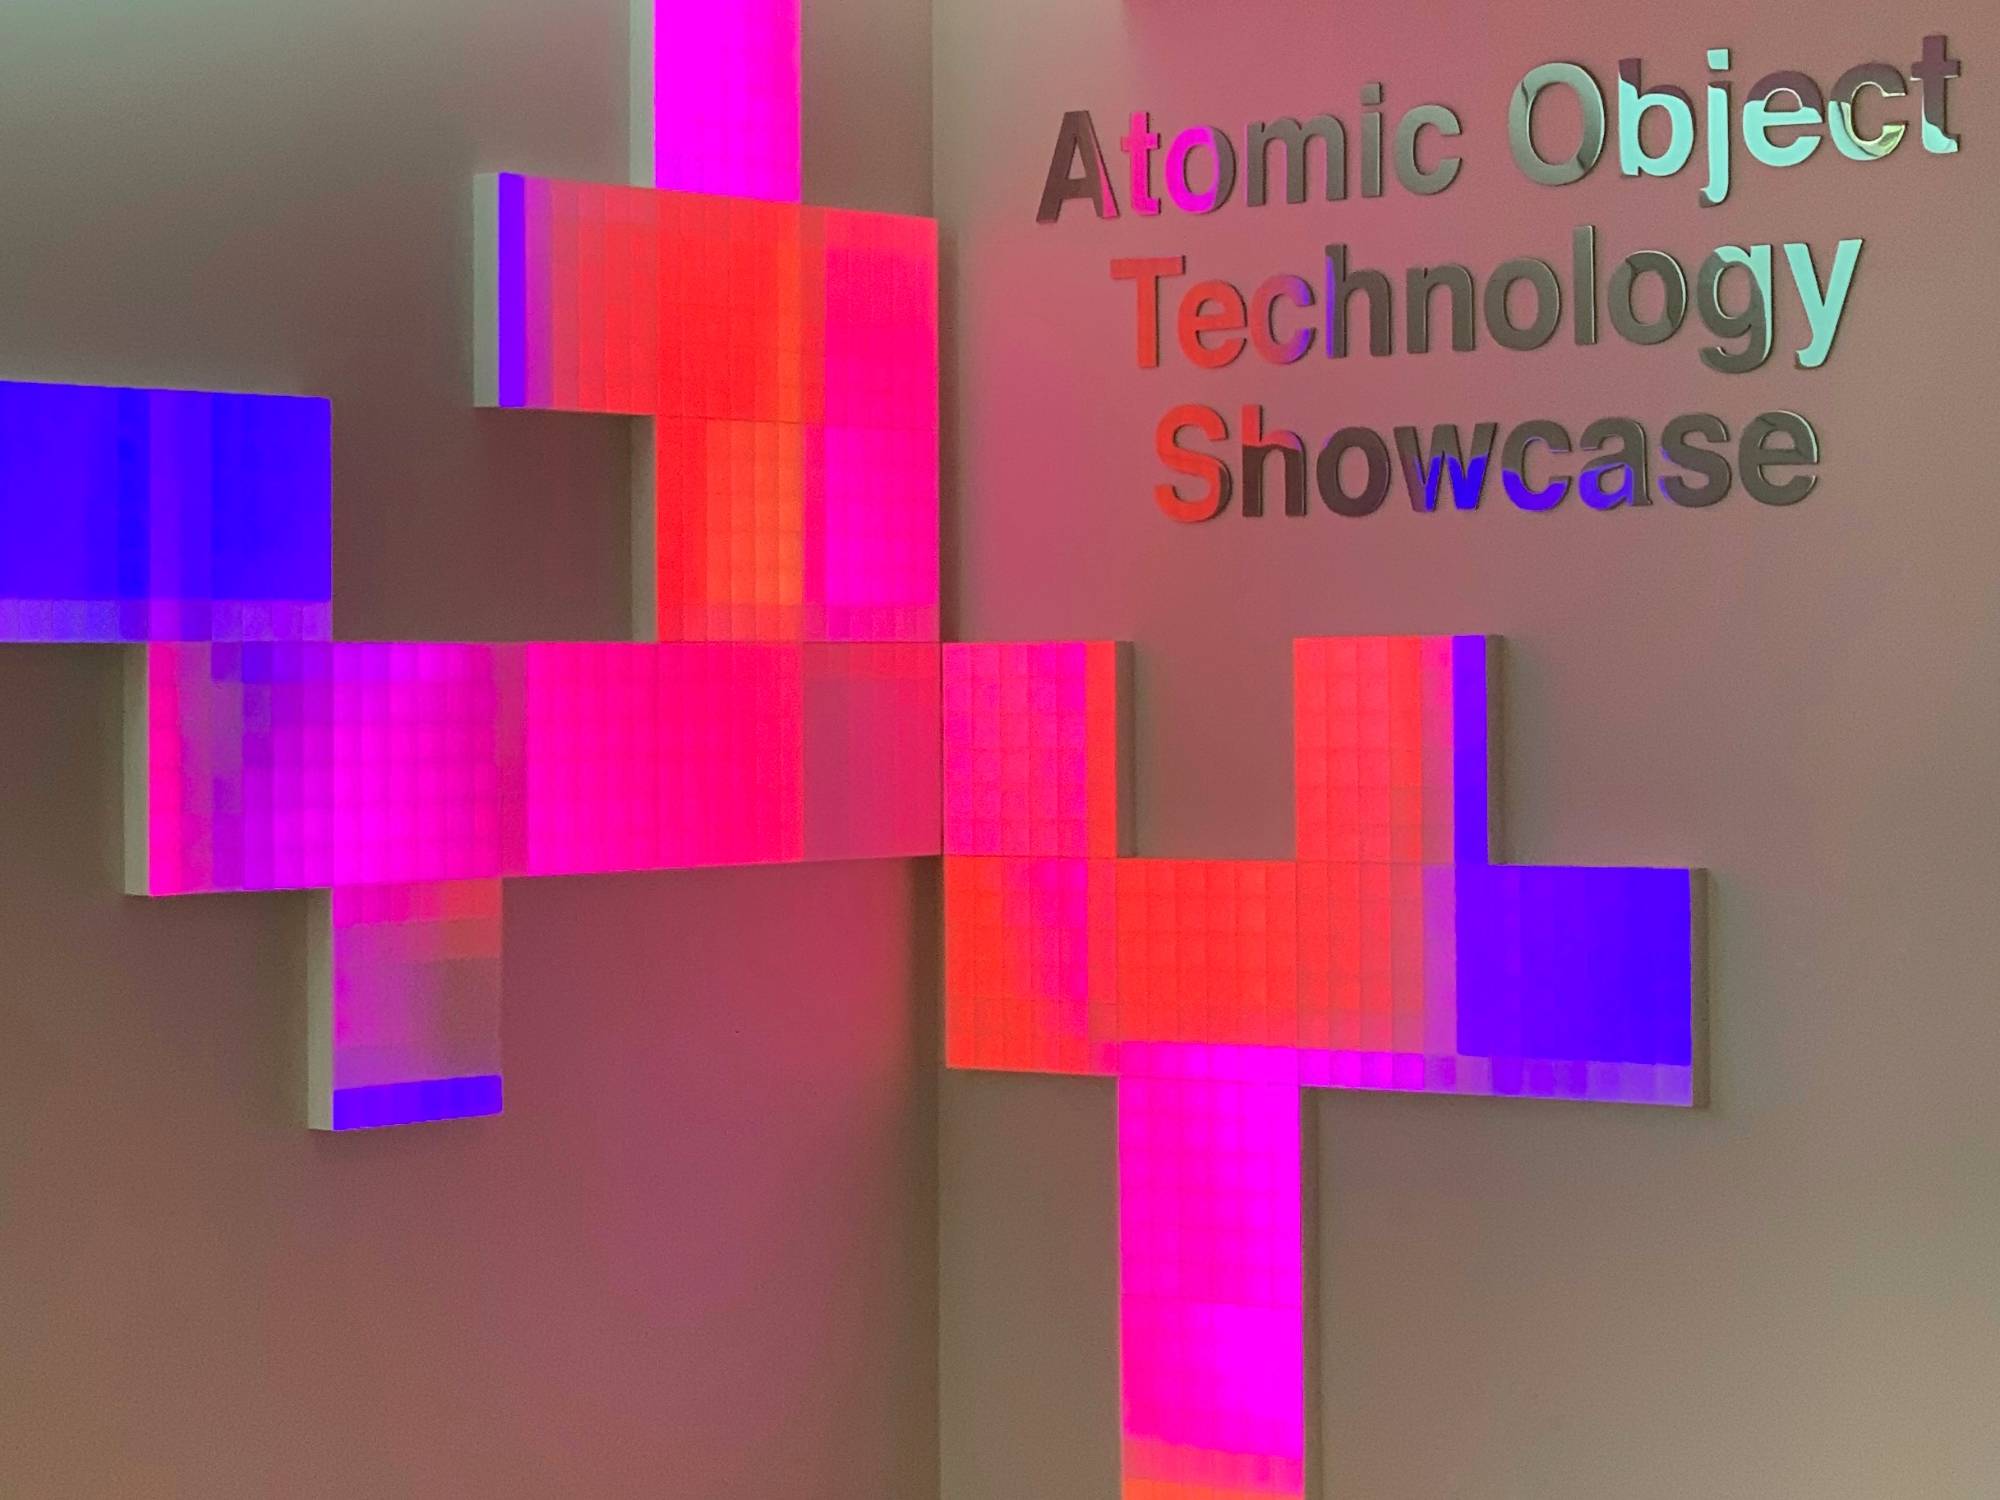 Atomic Object Technology Showcase sign with LED Tiles